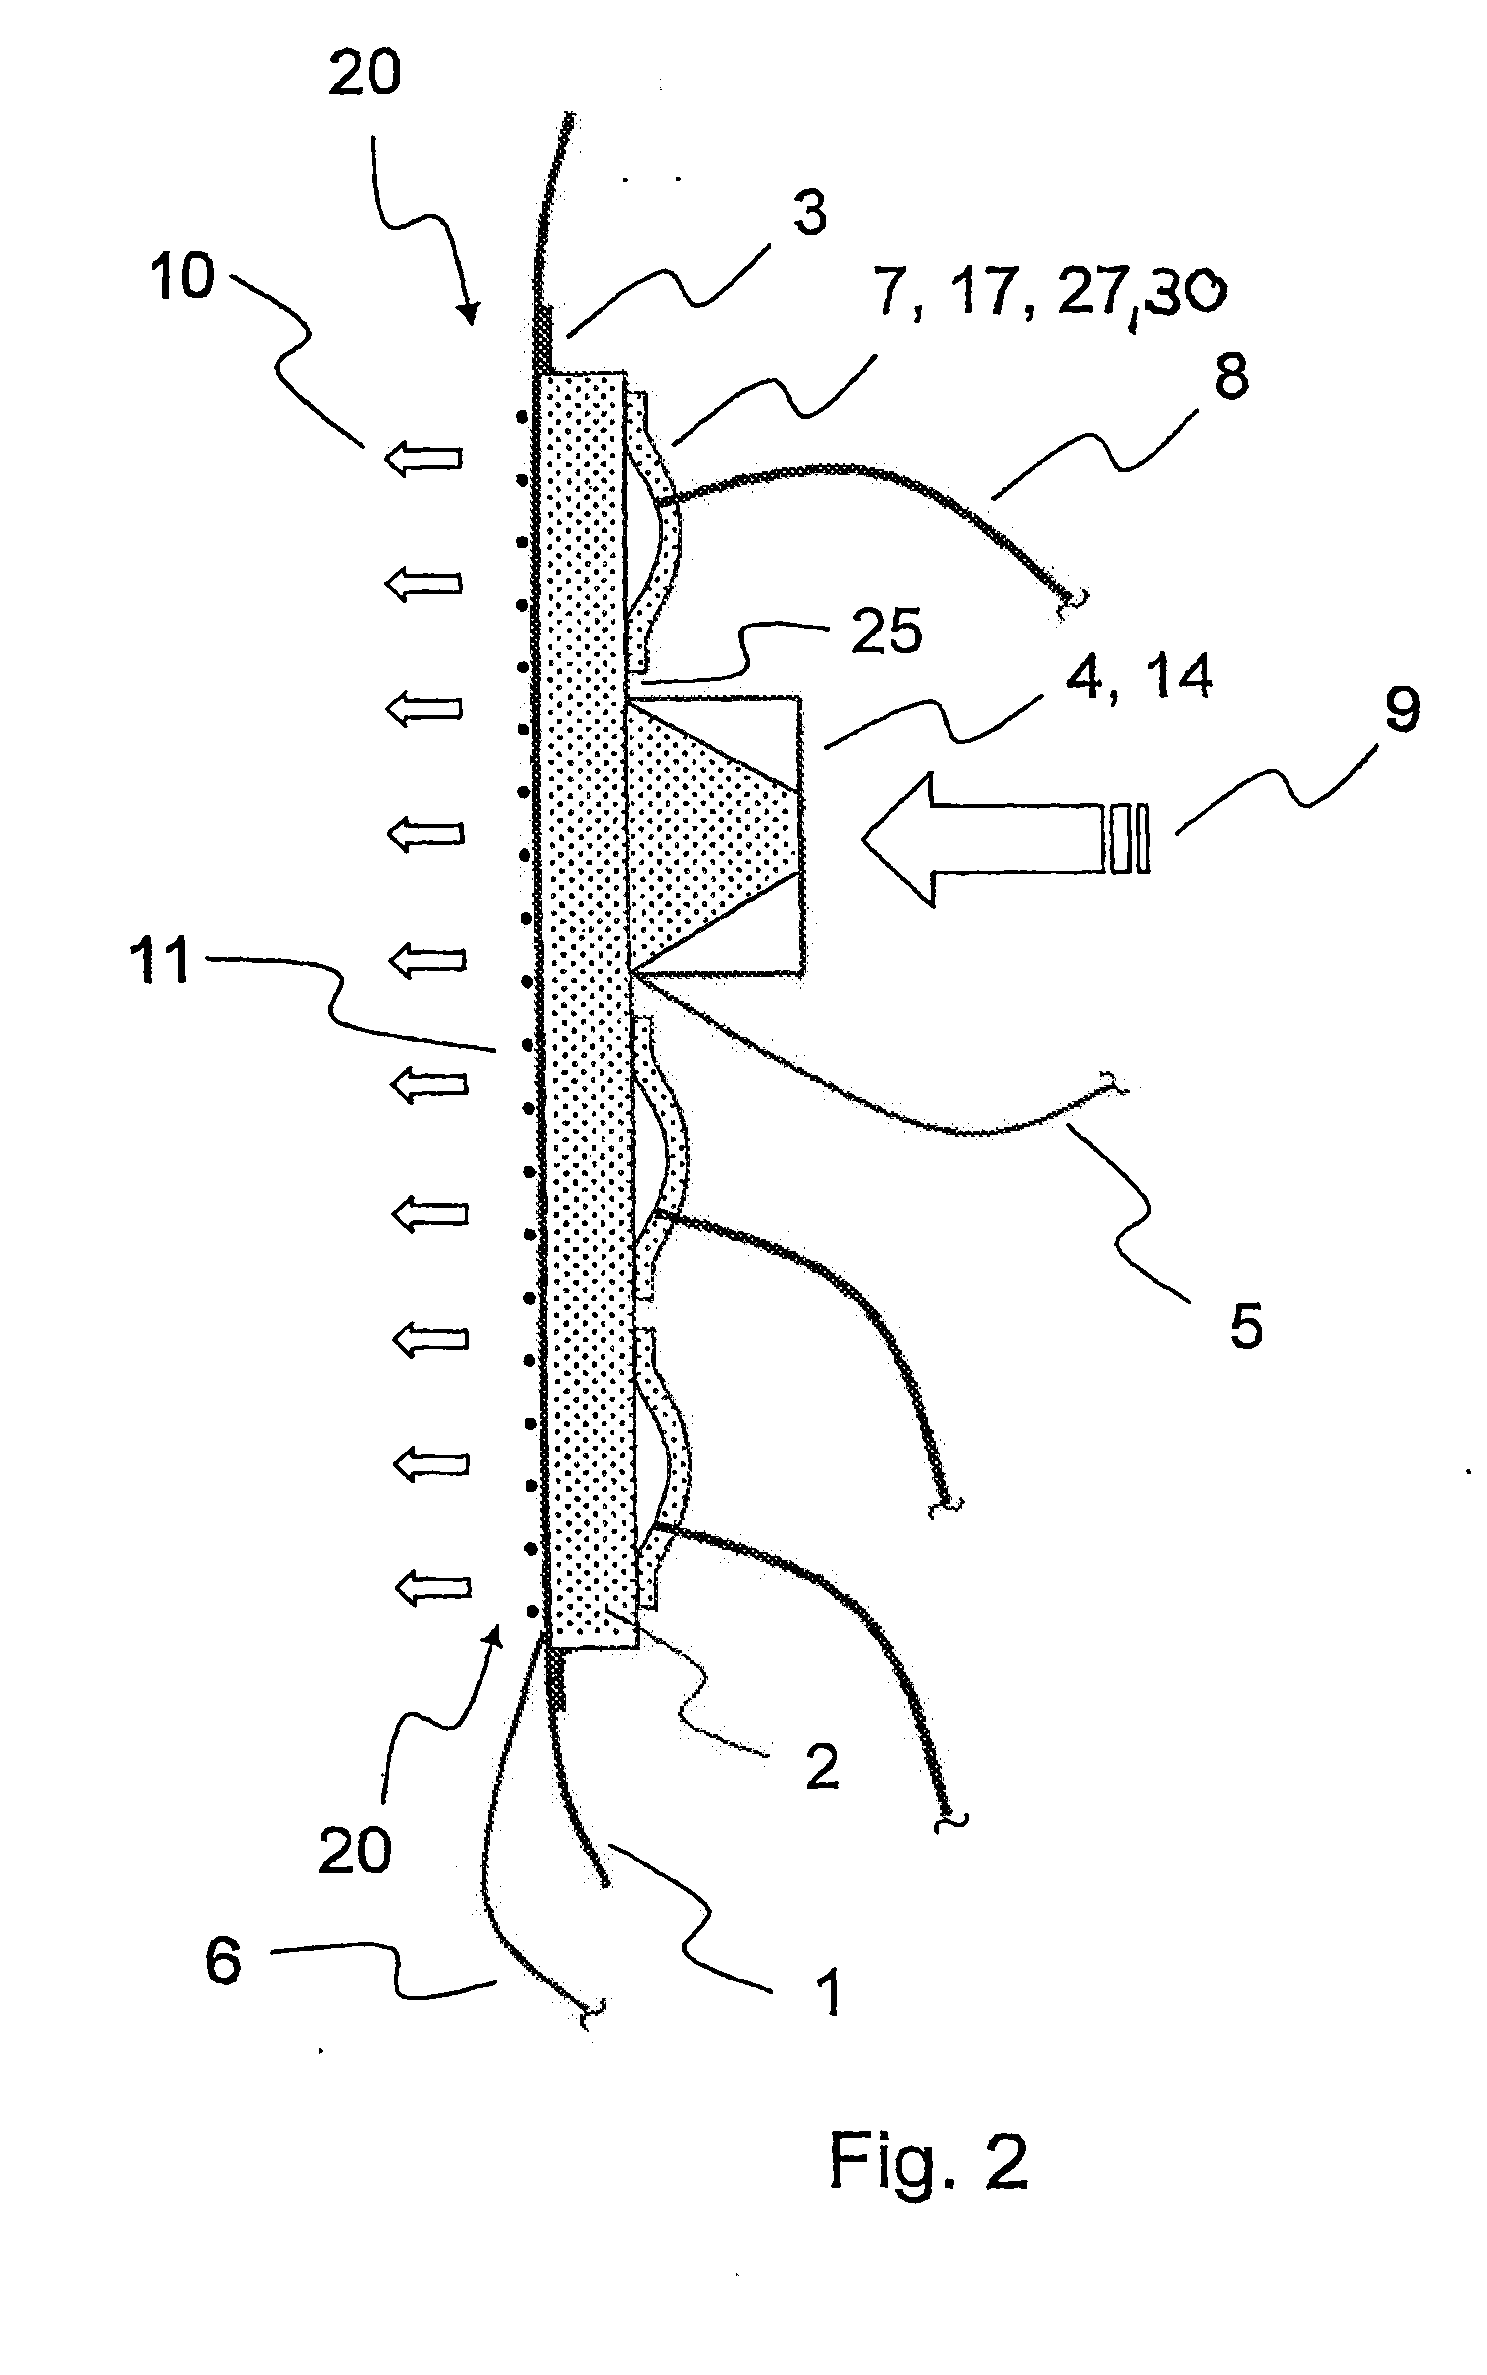 Device for conducting air in order to provide air conditioning for a body support device